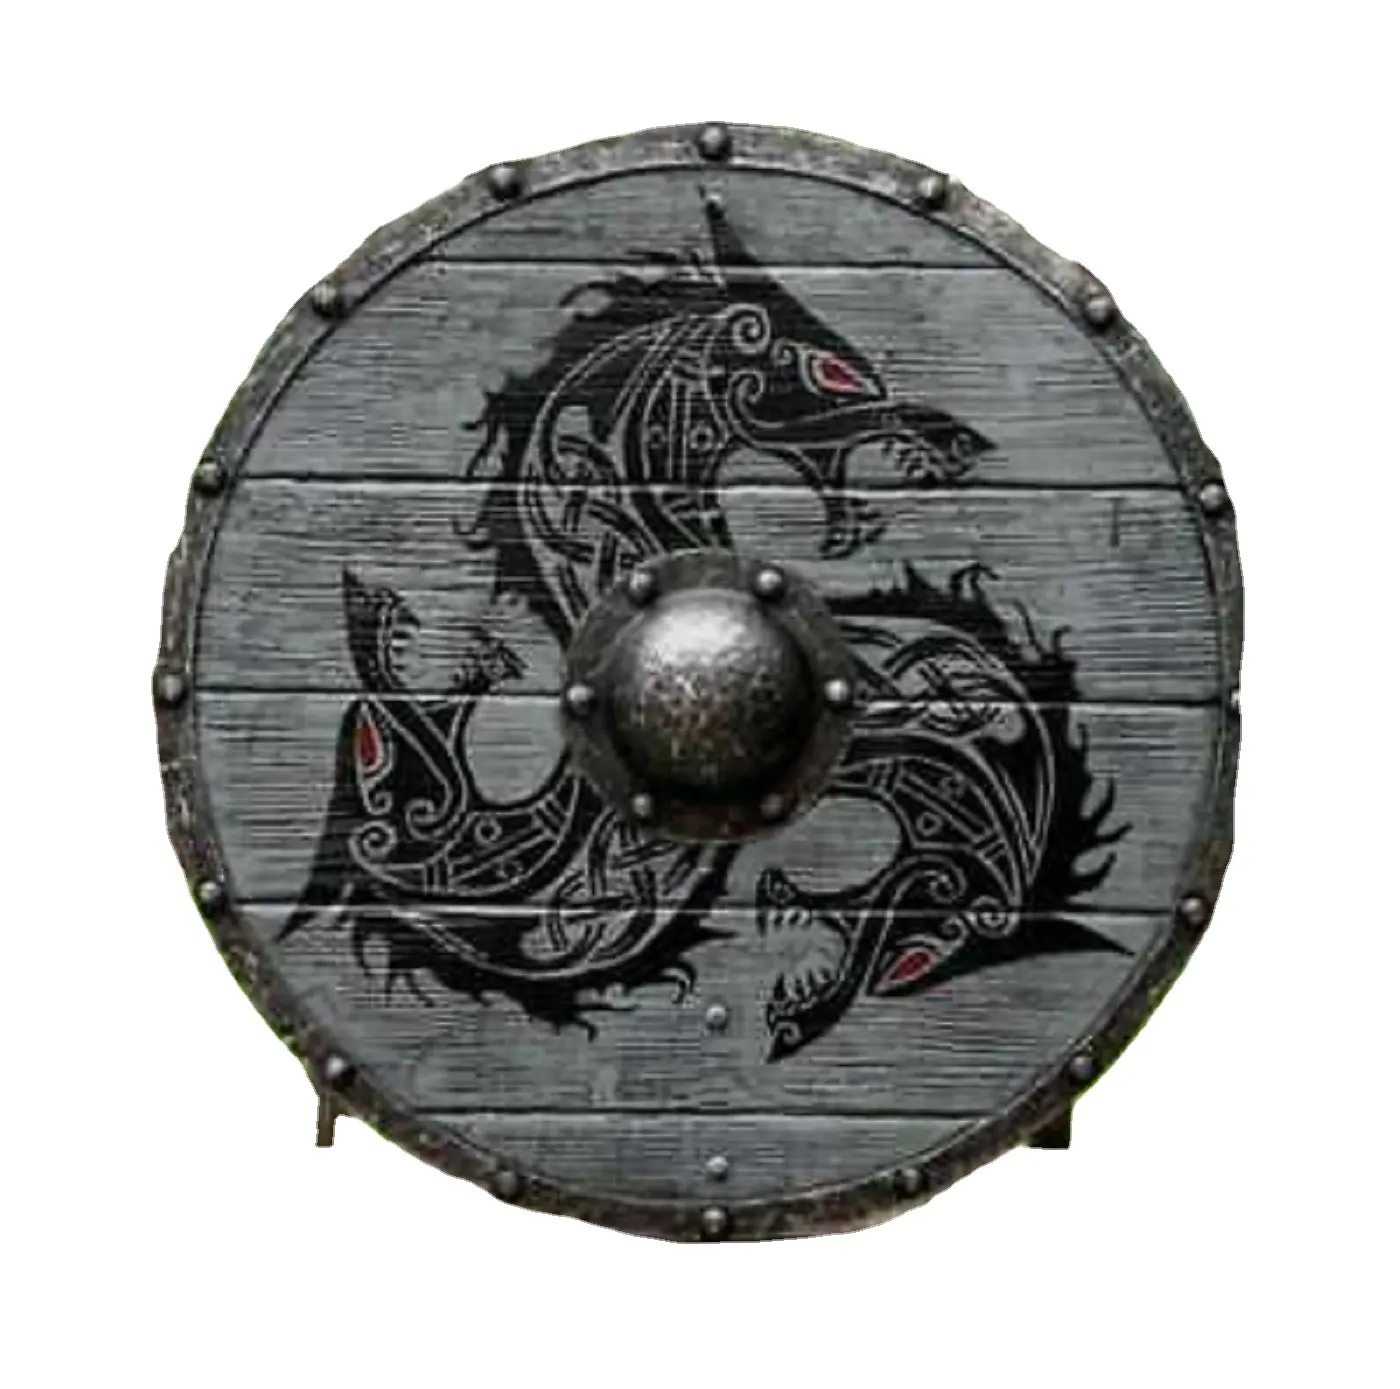 Viking Round Shield Armor CHMN10045 Medieval Round Shield Warrior Wood & Steel ARMOUR Metal Art & Collectible Antique Imitation